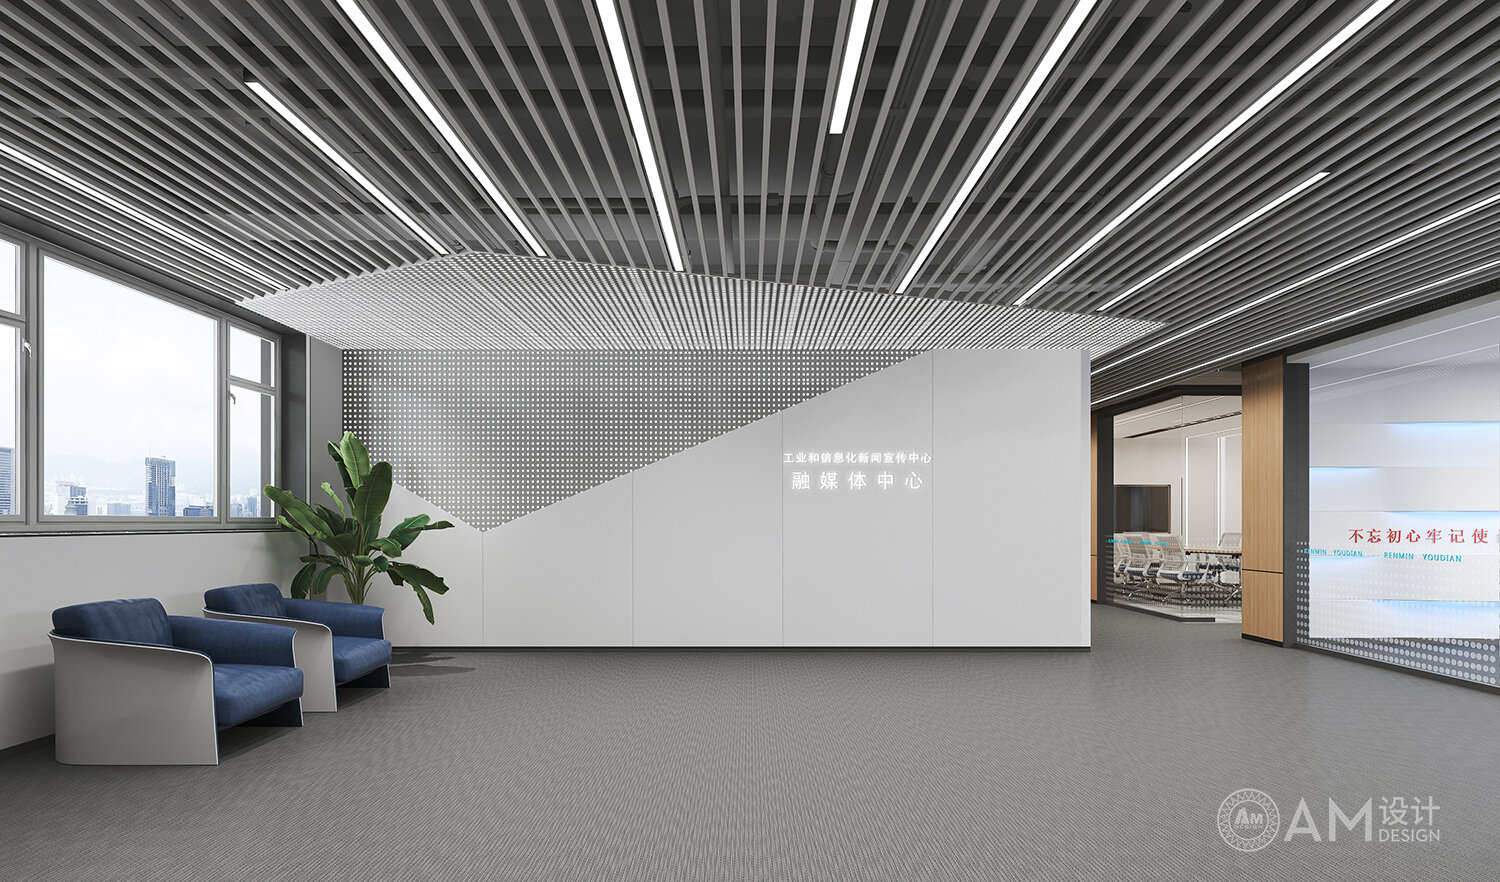 AM DESIGN | Front desk design of Beijing People's Post and Telecommunications Office